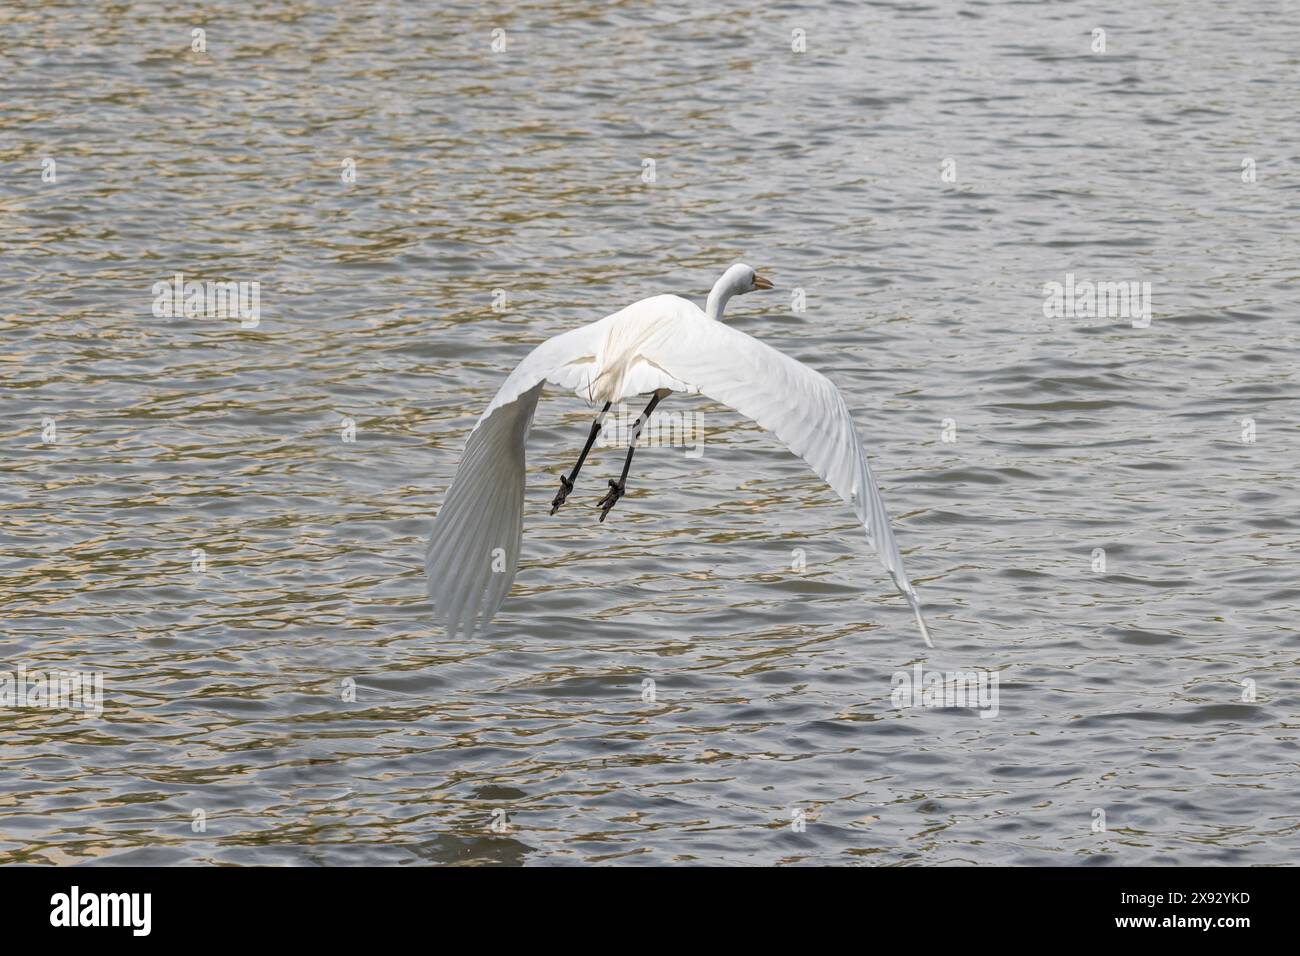 a great egret or white heron taking off in flight over water, with wings catching wind undercurrent, view from behind with legs clearly visible Stock Photo